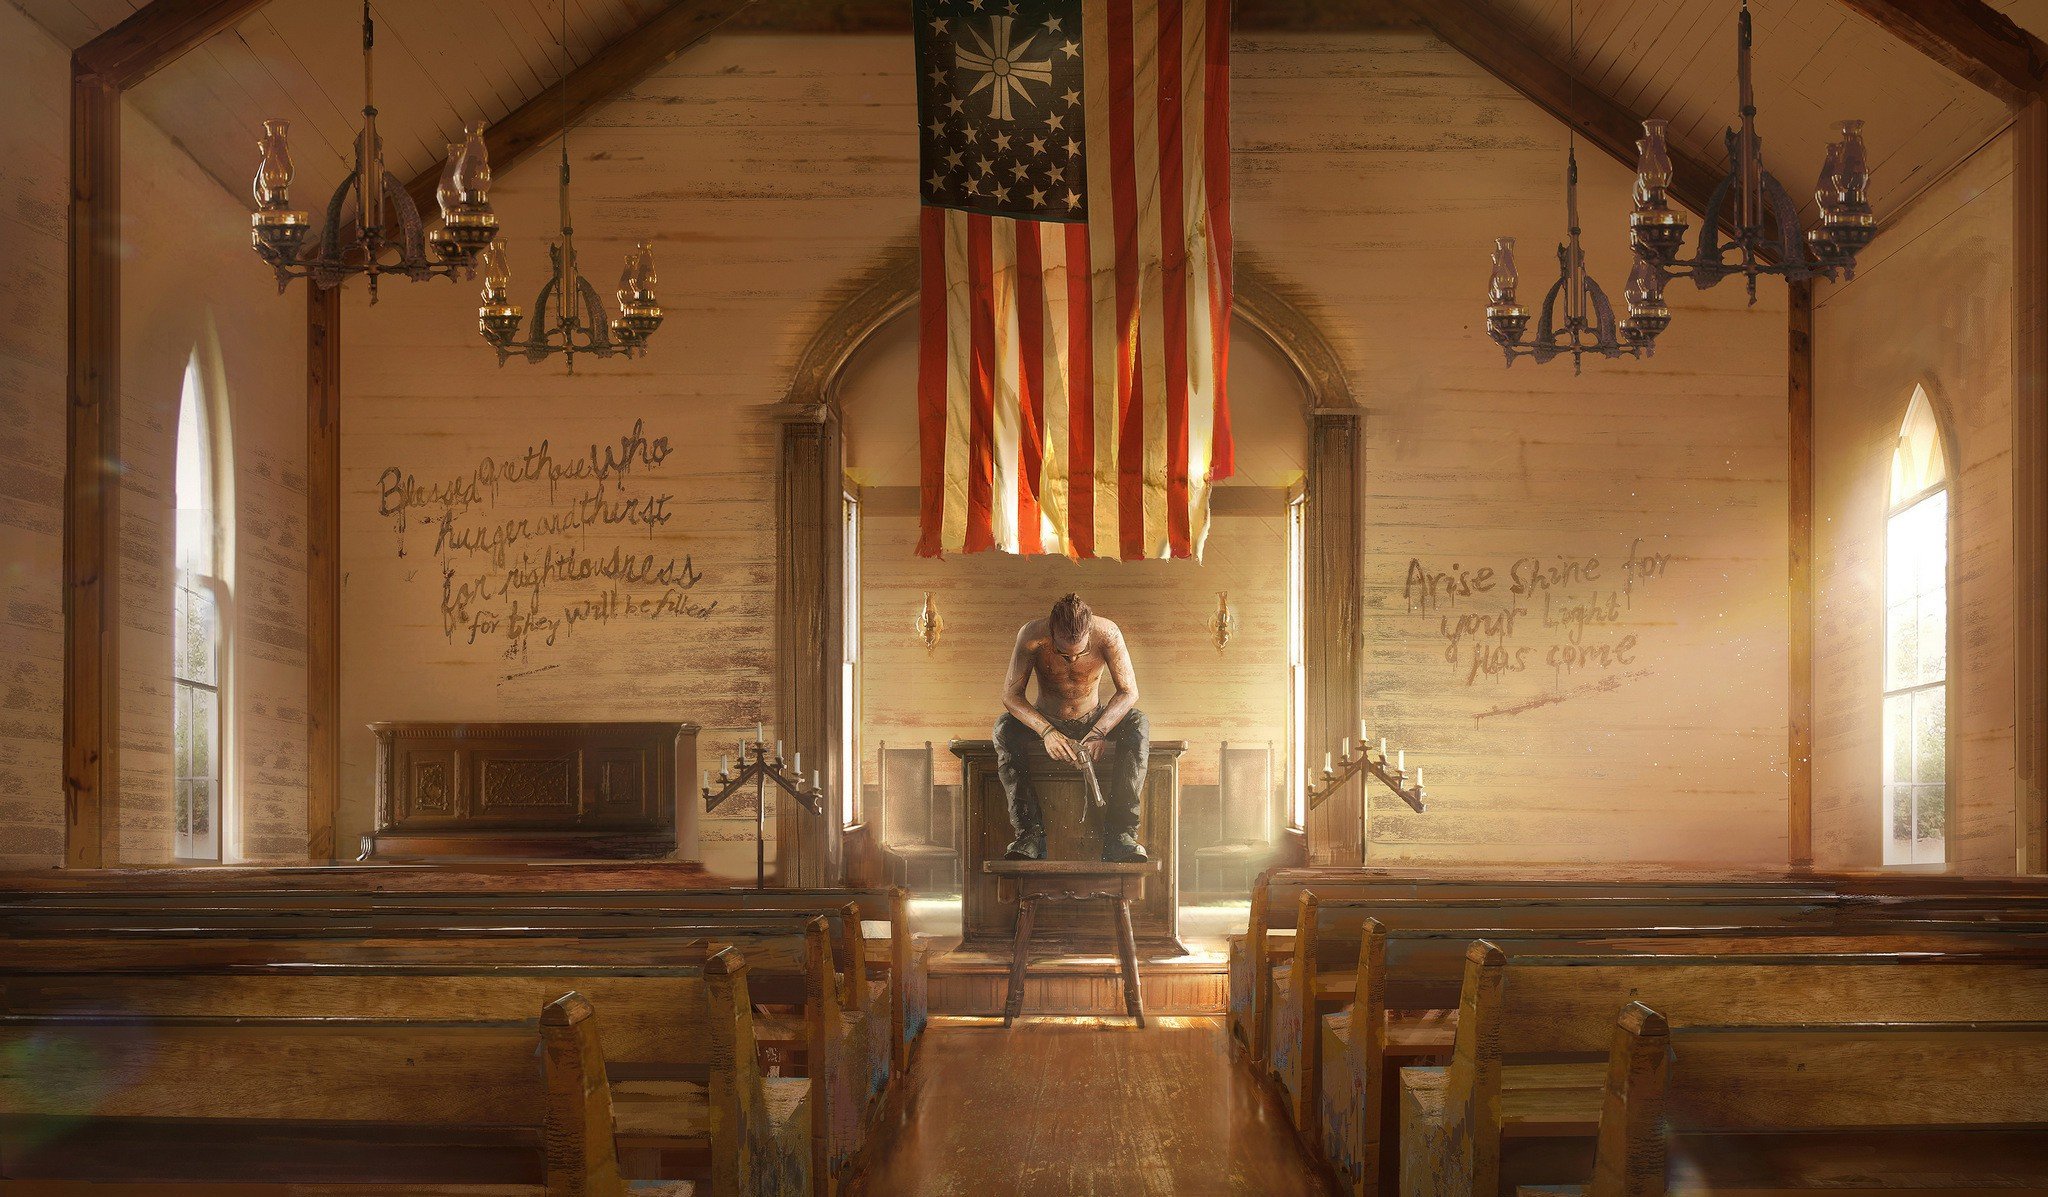 4K Loading screens and music theme from the game Far Cry 5 